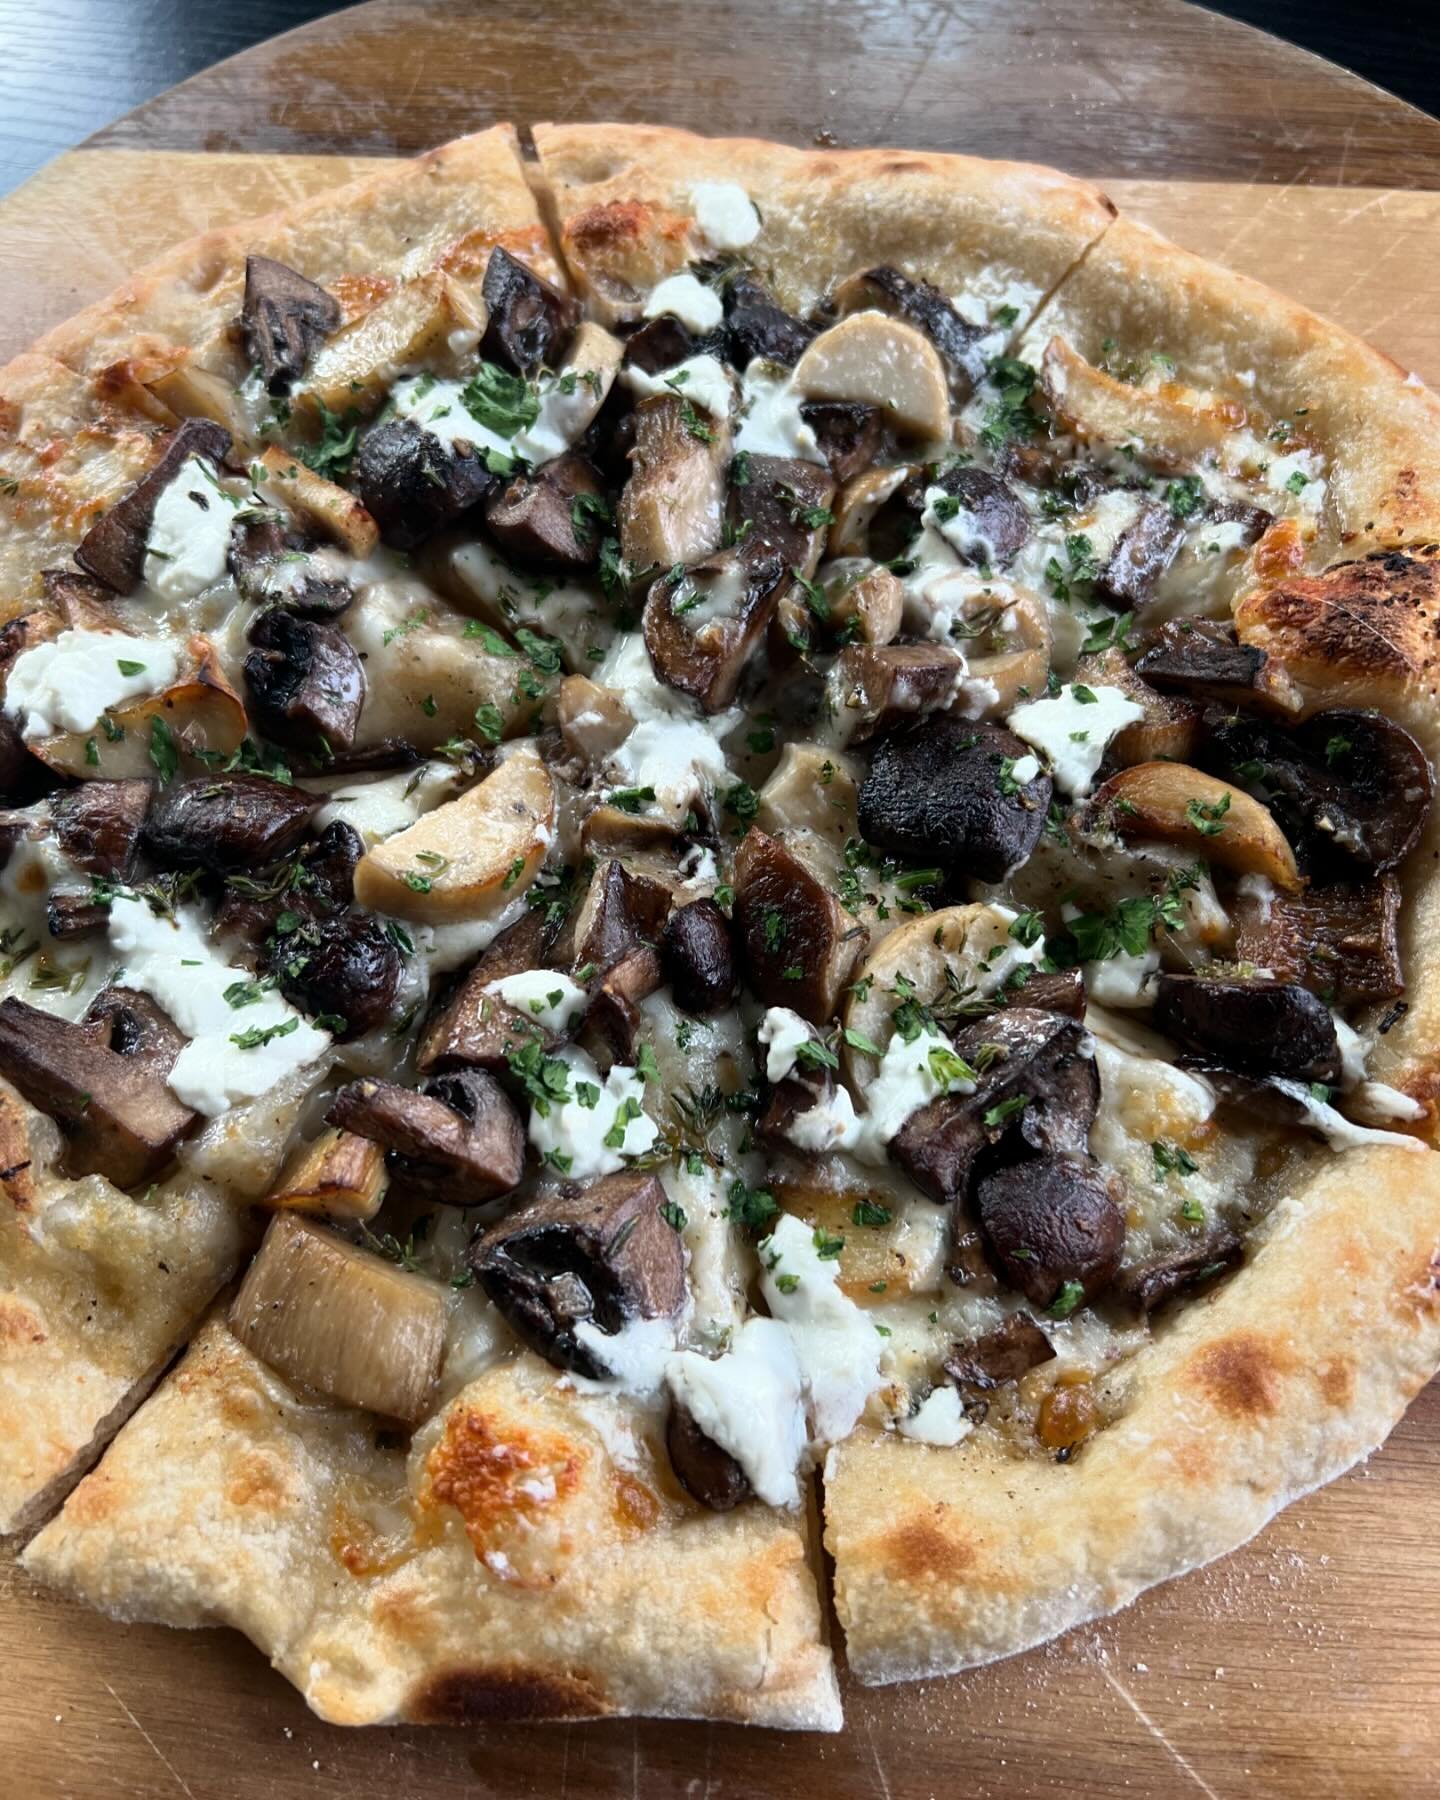 New to the menu, our Funghi Pizza, topped would Crimini and Trumpet Royal Mushrooms, Goat Cheese, Mozzarella, and Thyme.